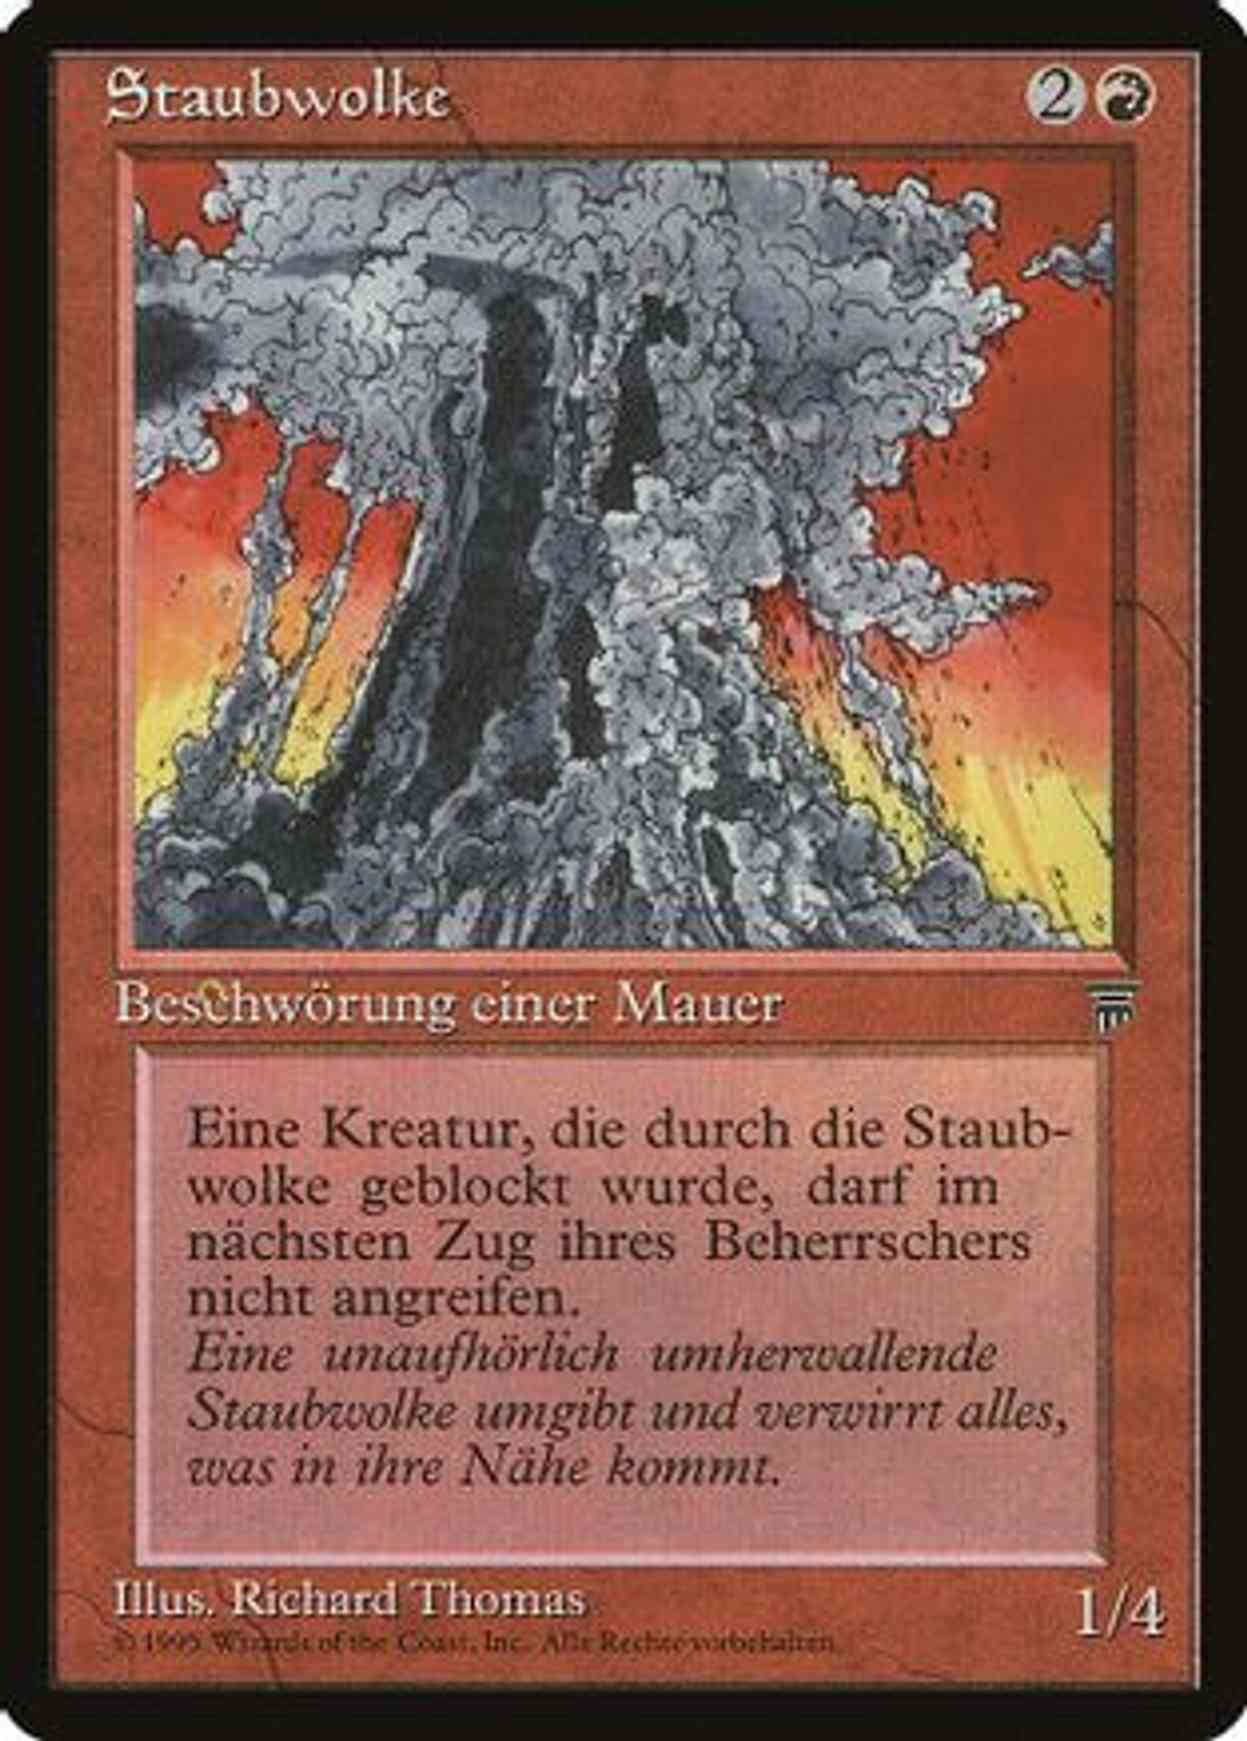 Wall of Dust (German) - "Staubwolke" magic card front